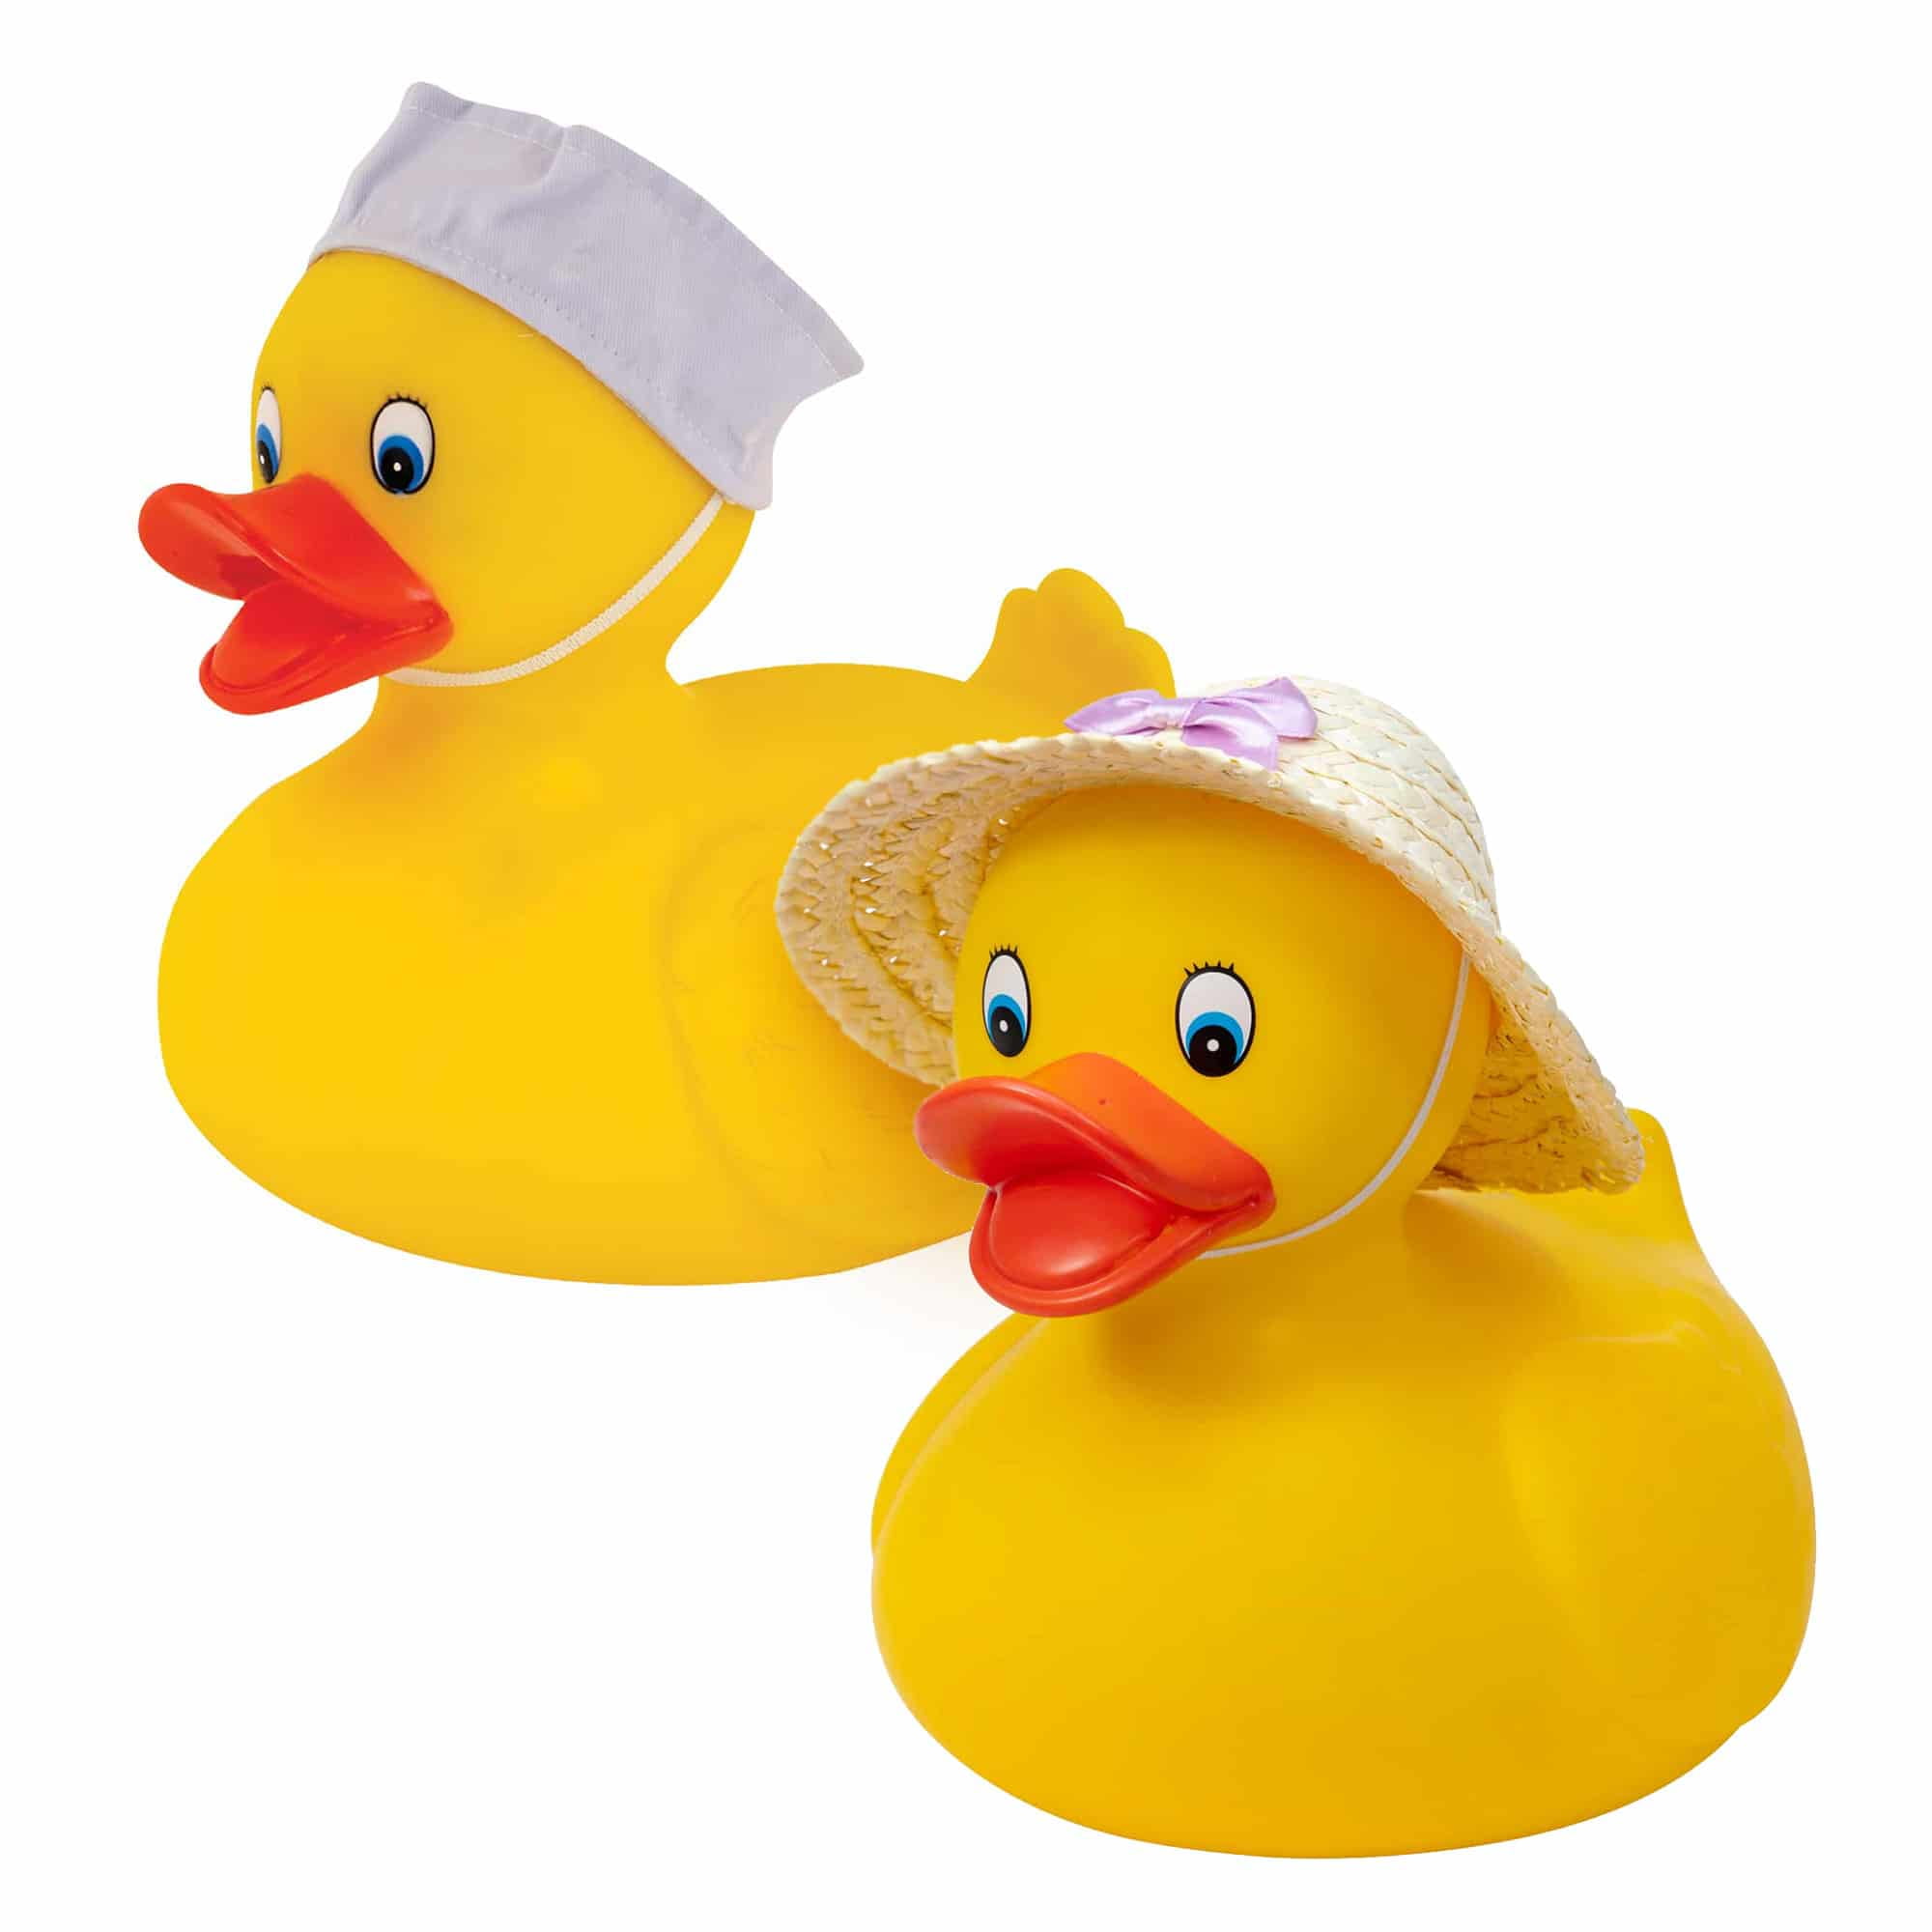 Schylling Large Classic Yellow Rubber Ducky (10in tall, styles